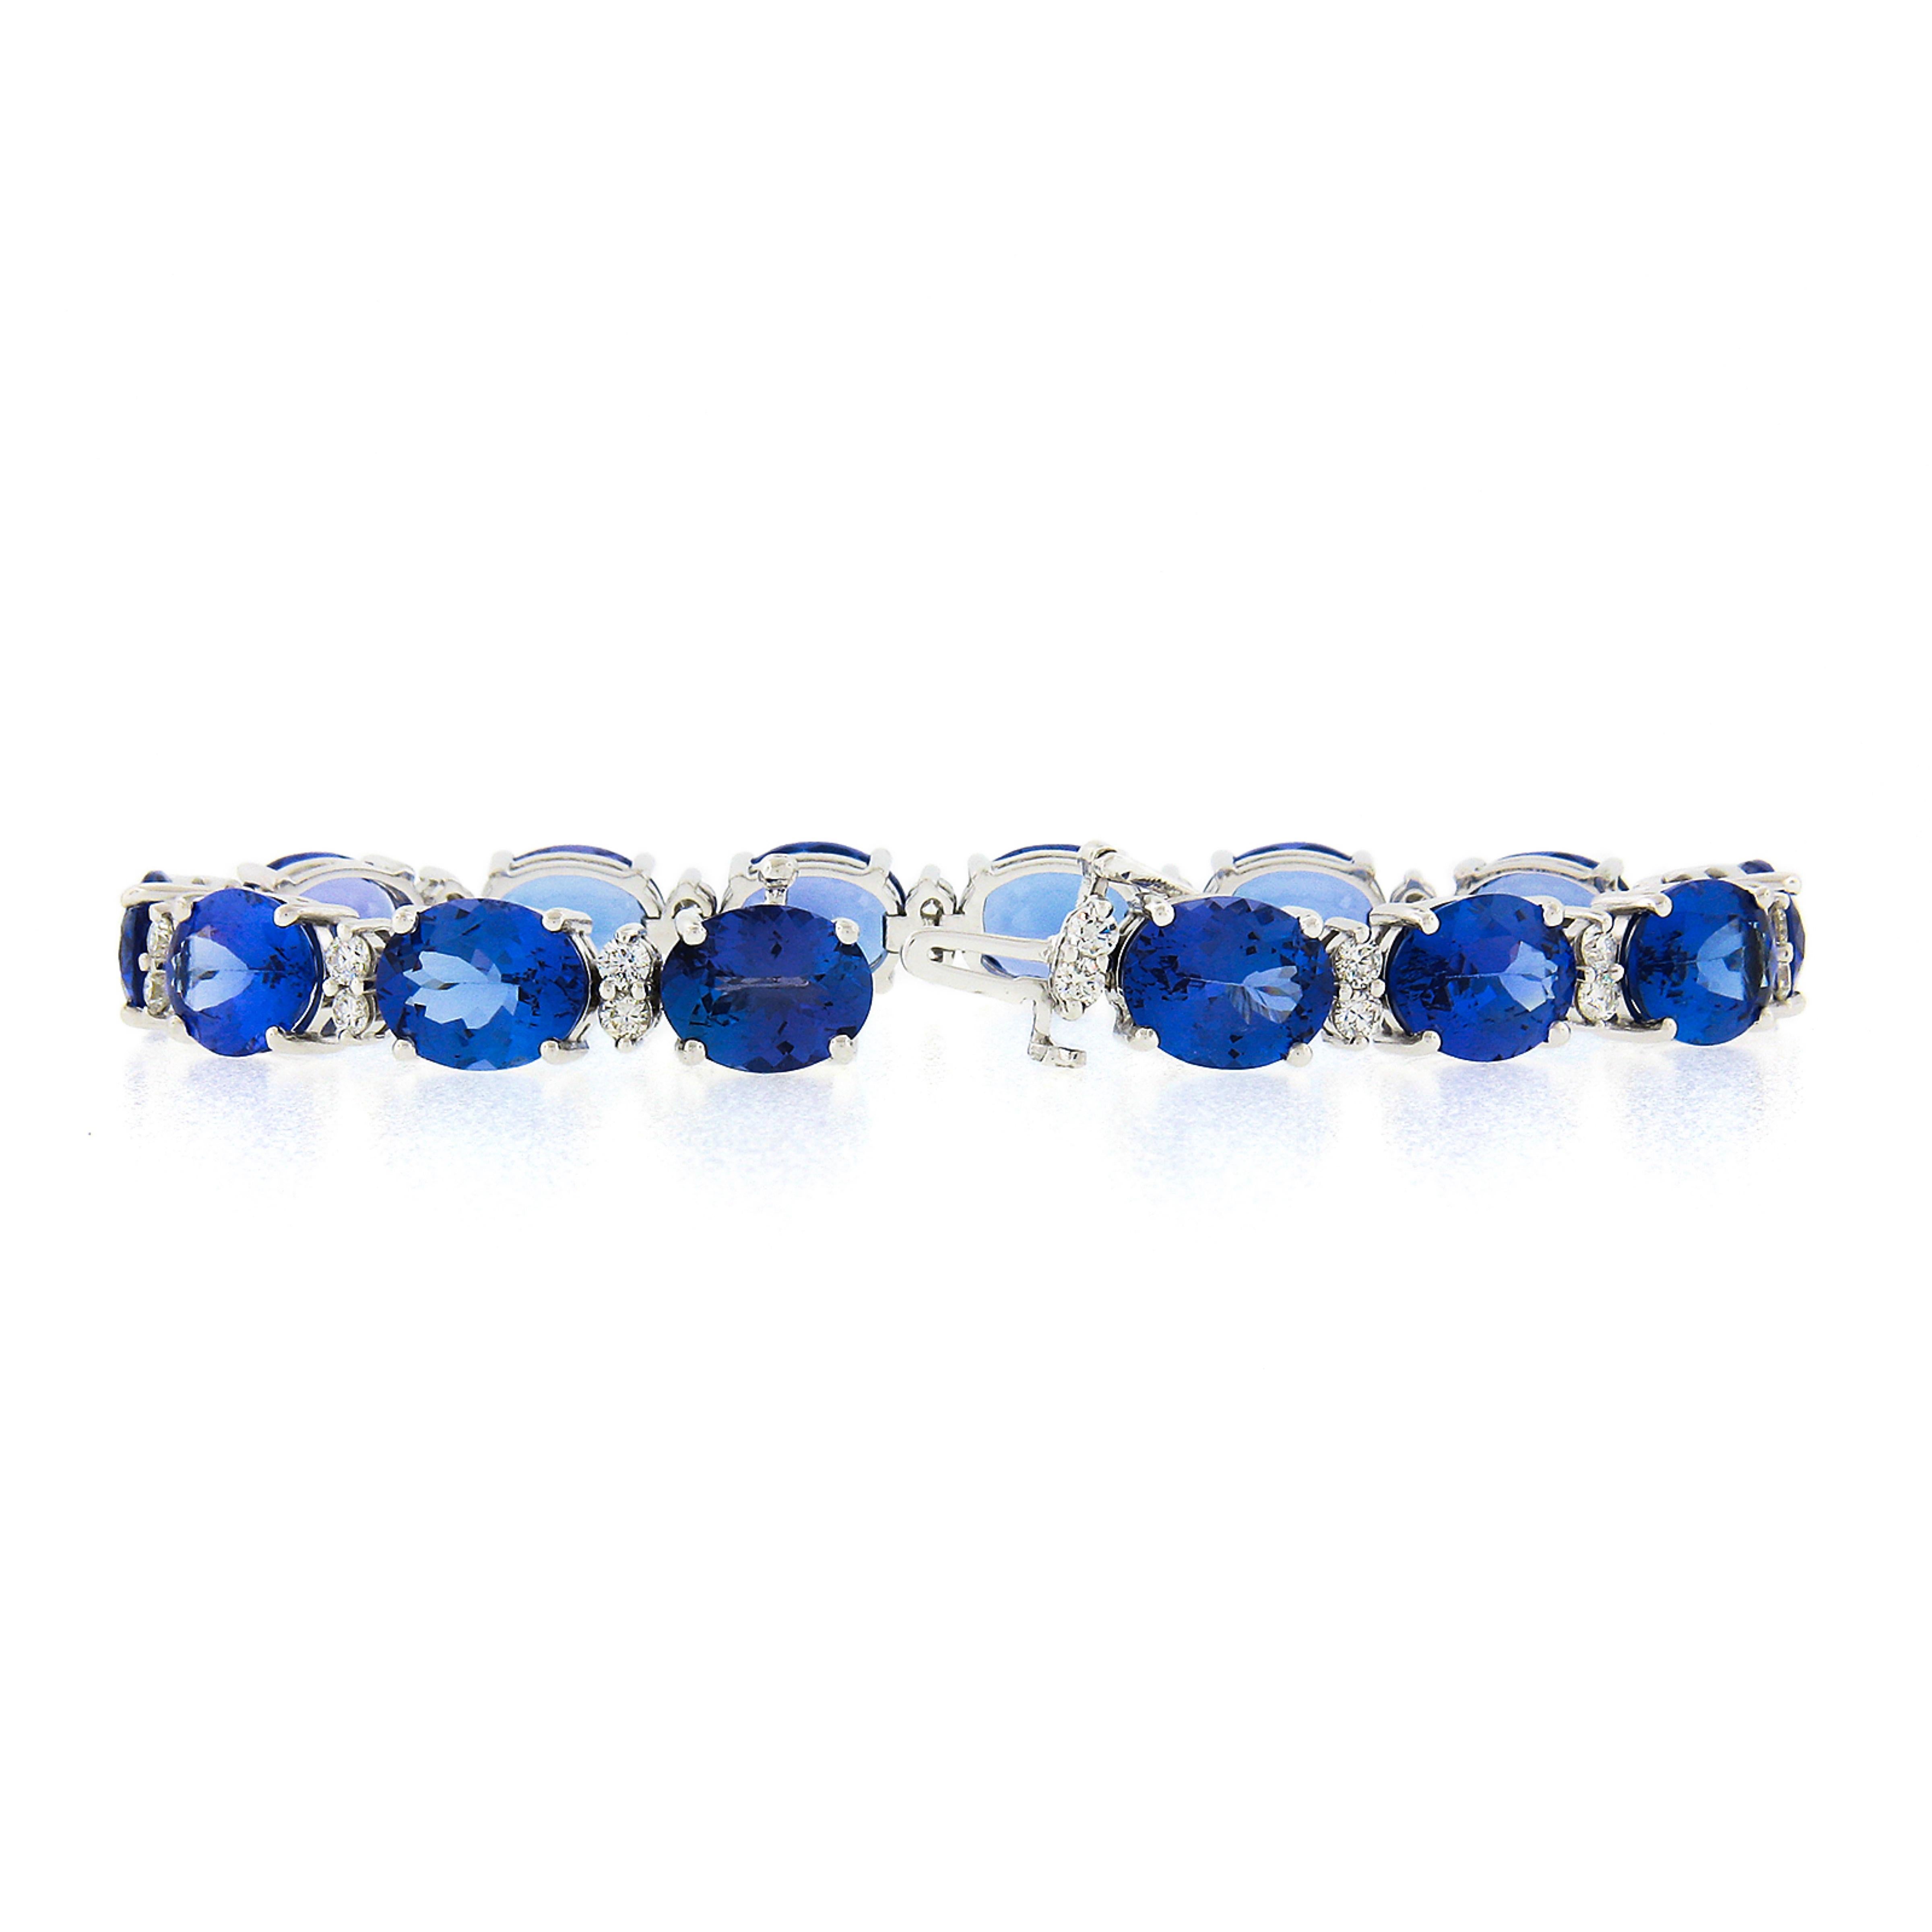 New 14k Gold 37.71ct Alternating Oval Tanzanite & Round Diamond Tennis Bracelet In New Condition For Sale In Montclair, NJ